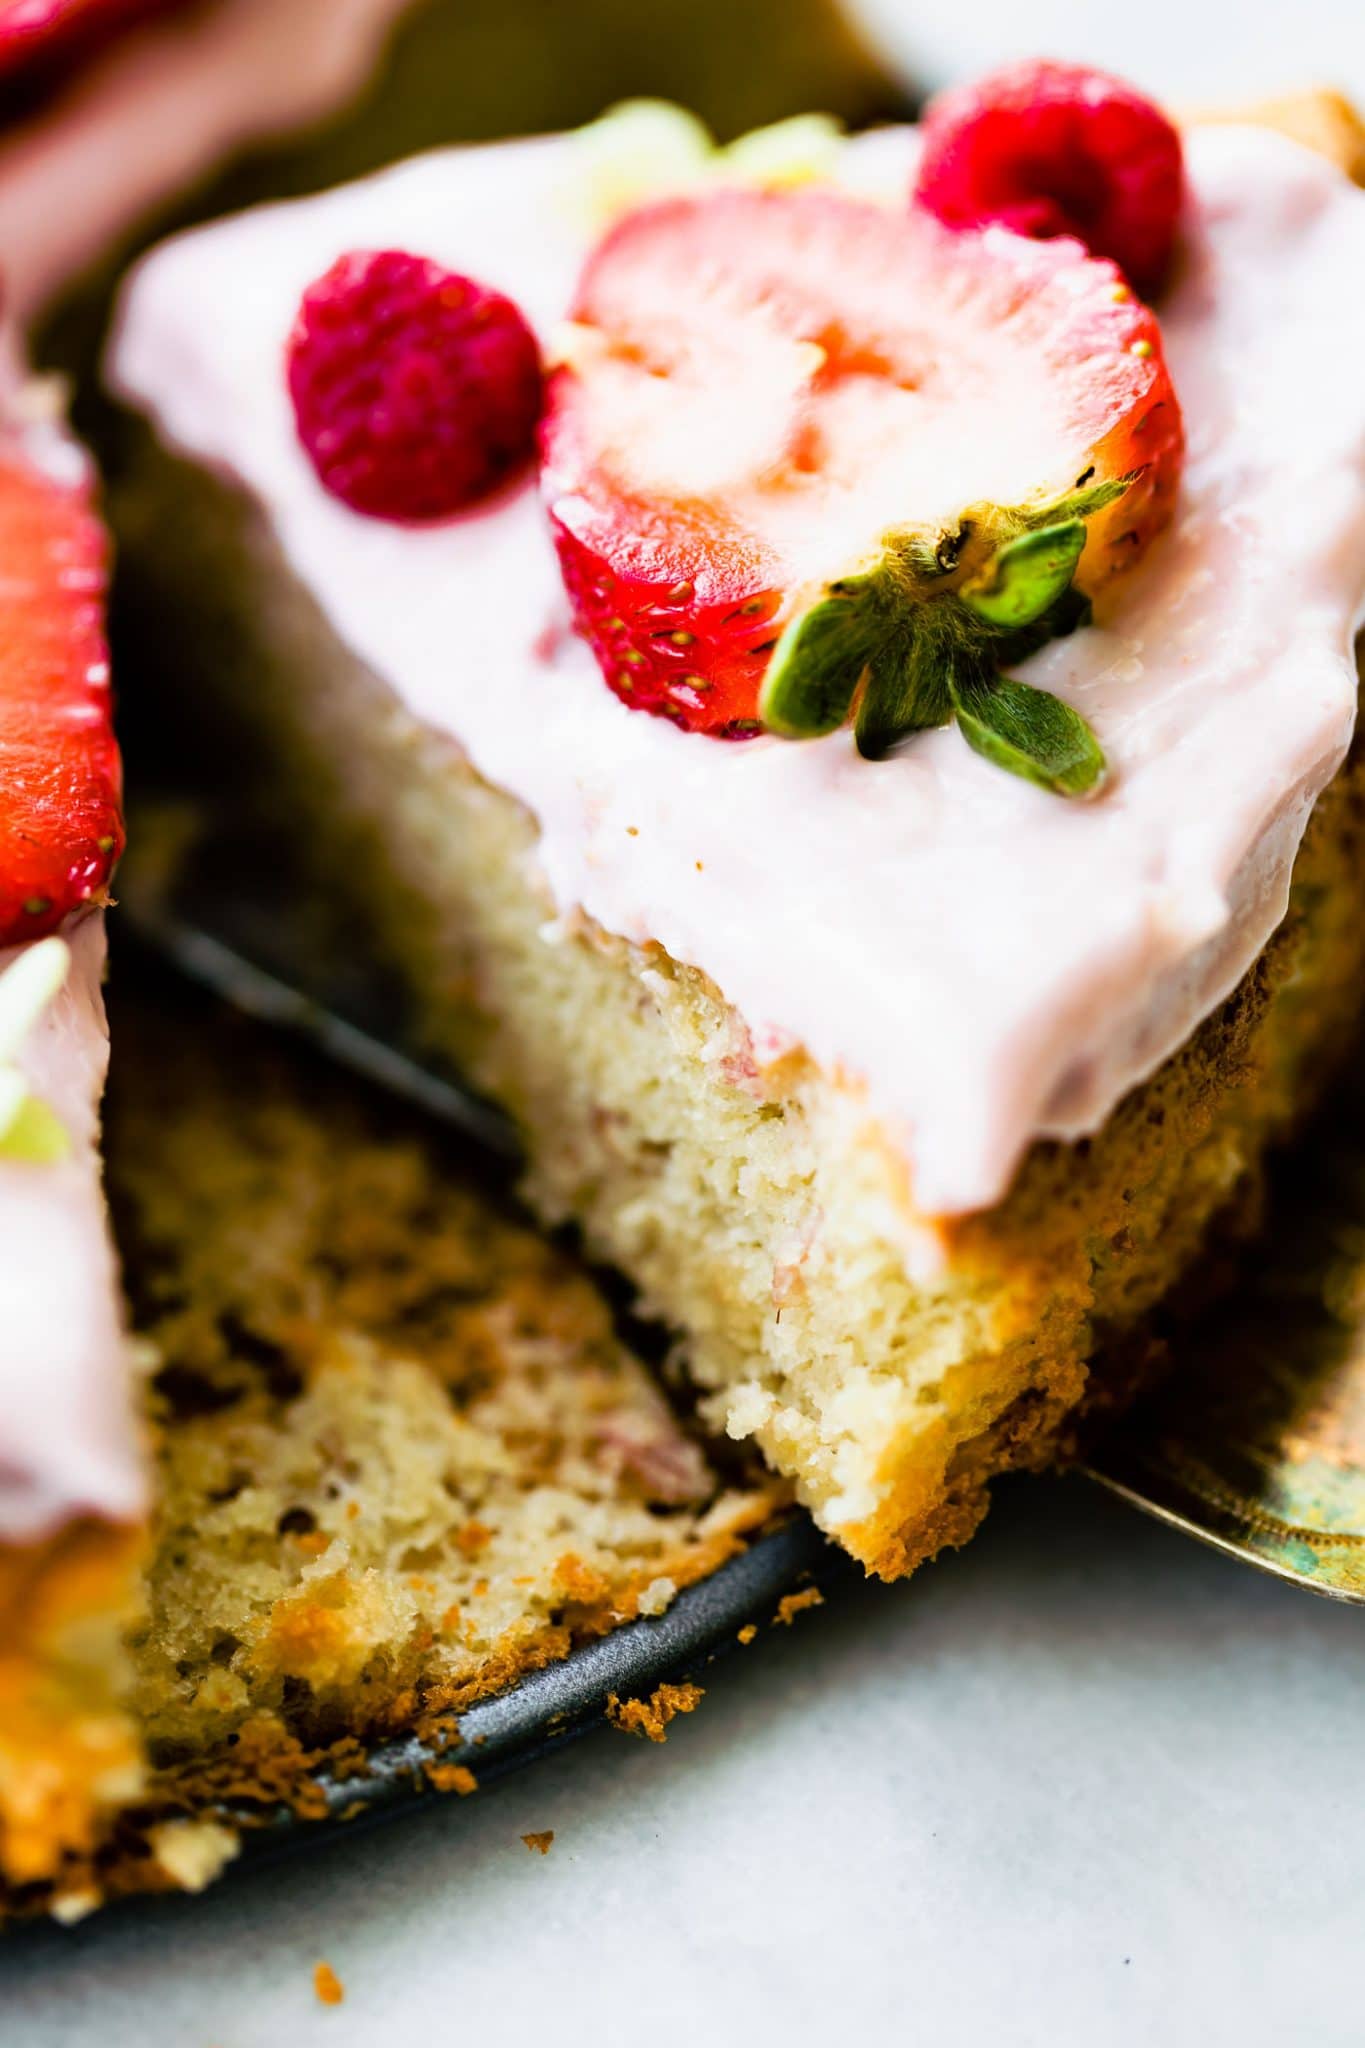 Close up image of a slice of almond cake with yogurt frosting being pulled from the pan, garnished with berries.